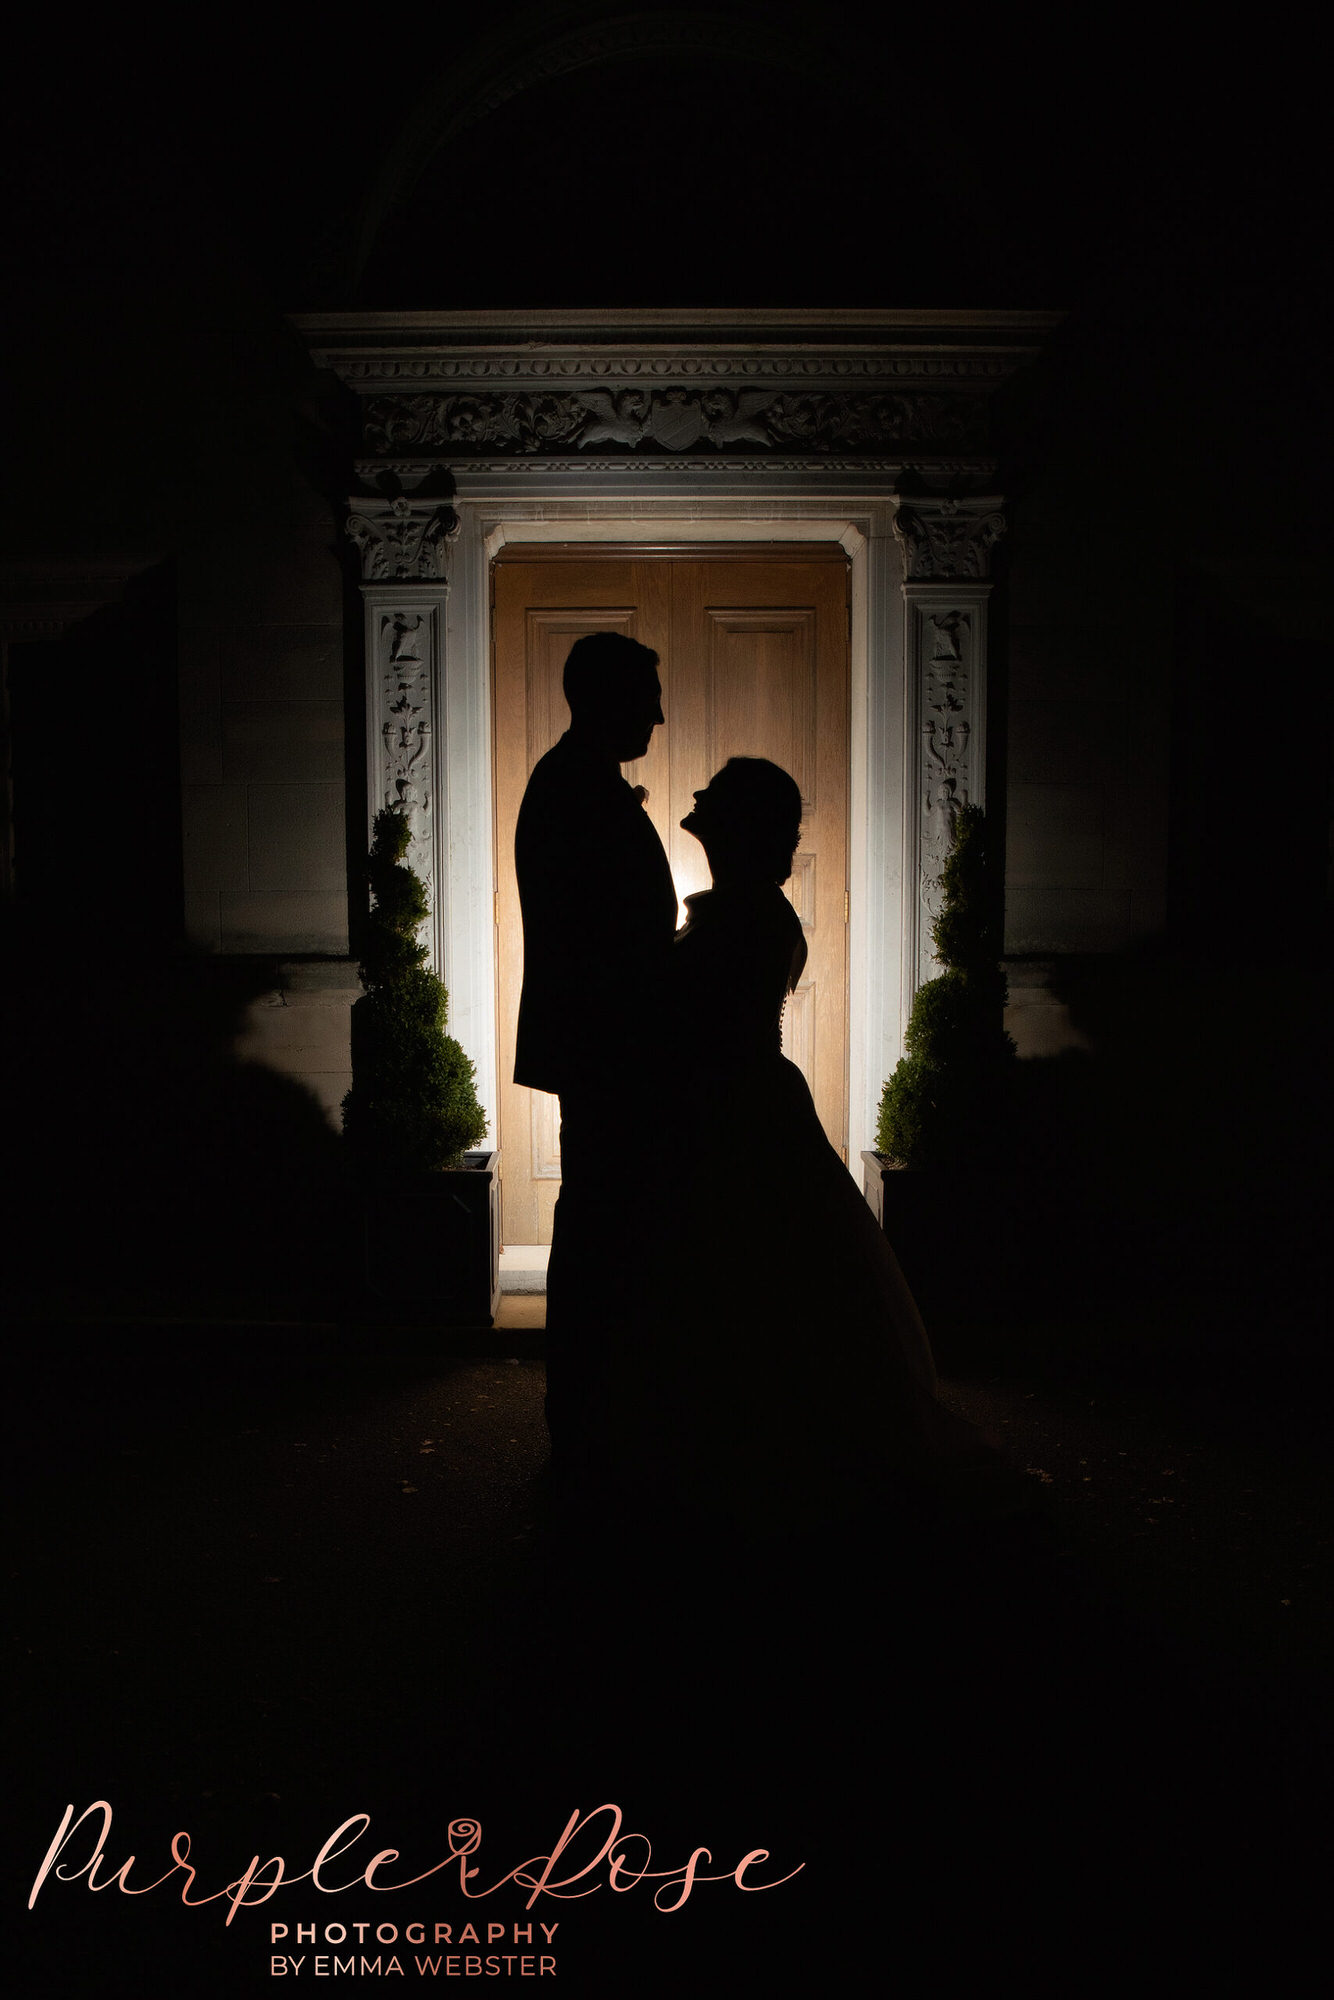 Silhouette of a bride and groom